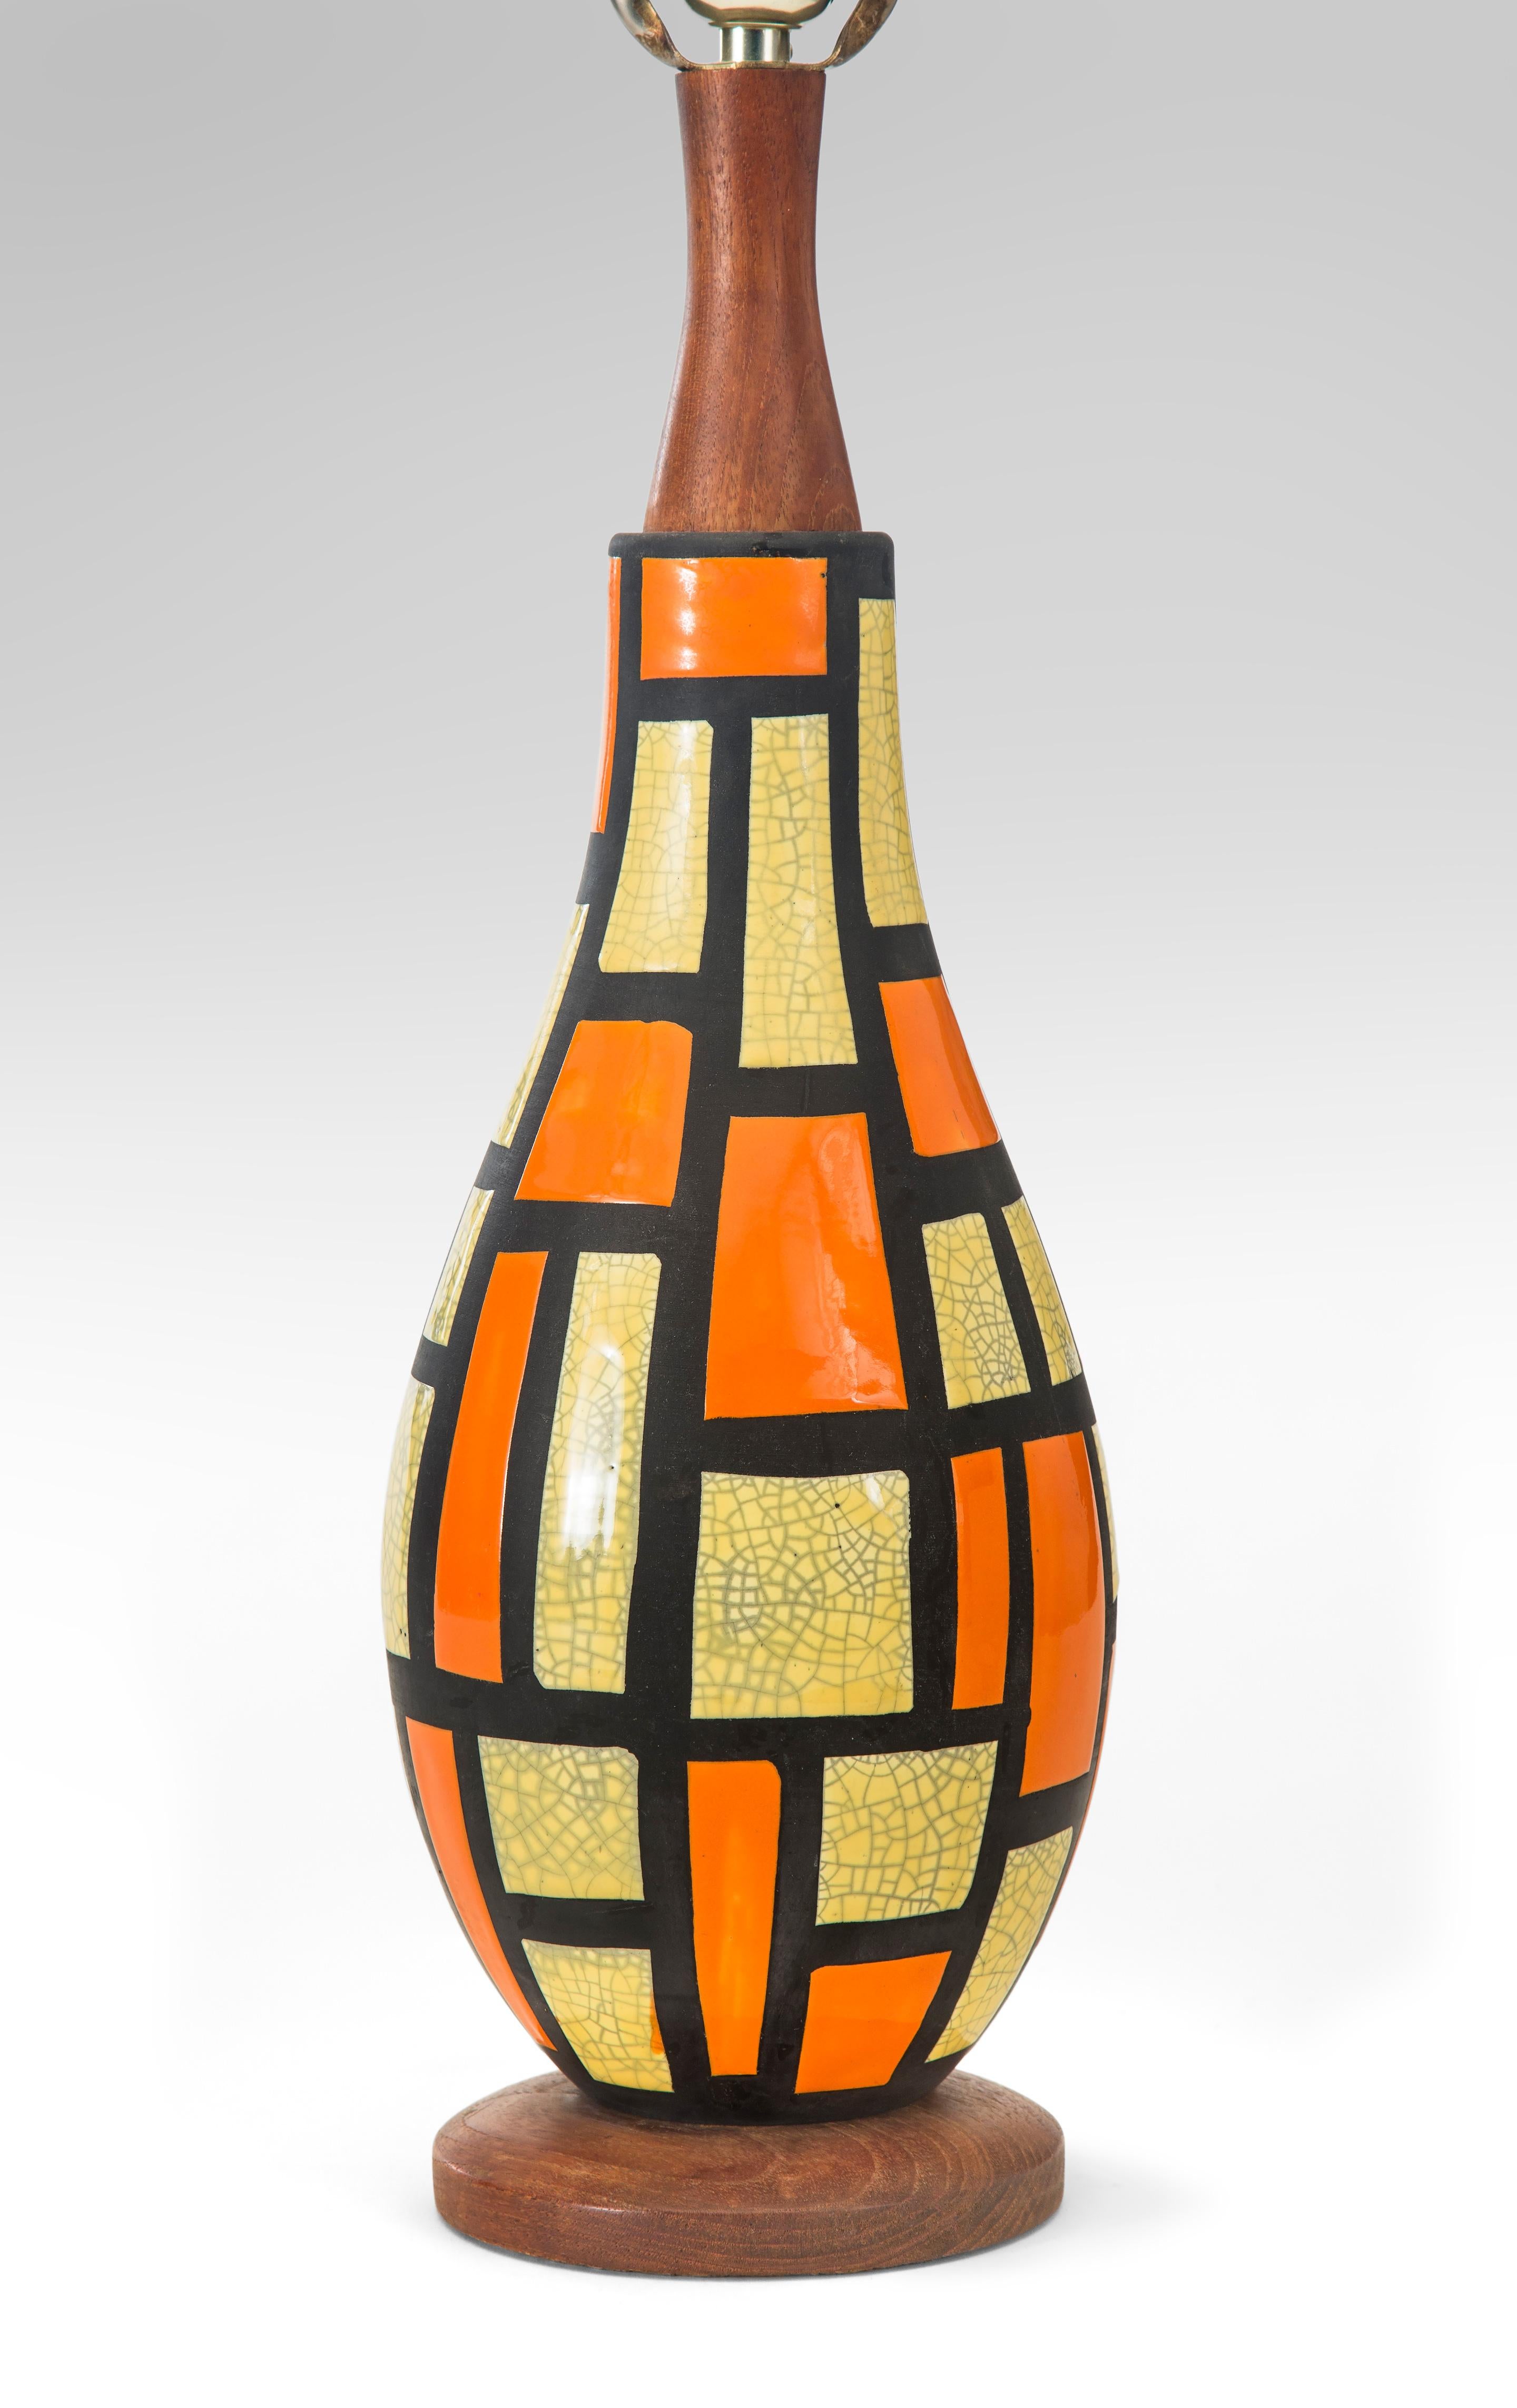 Midcentury orange and yellow ceramic lamp,
circa 1950
This lamp with its bright colors arranged in an irregular grid defines mid century modern. The bottle-shaped vase with a craquelure glaze of a colorful patchwork design. This lamp will add joy